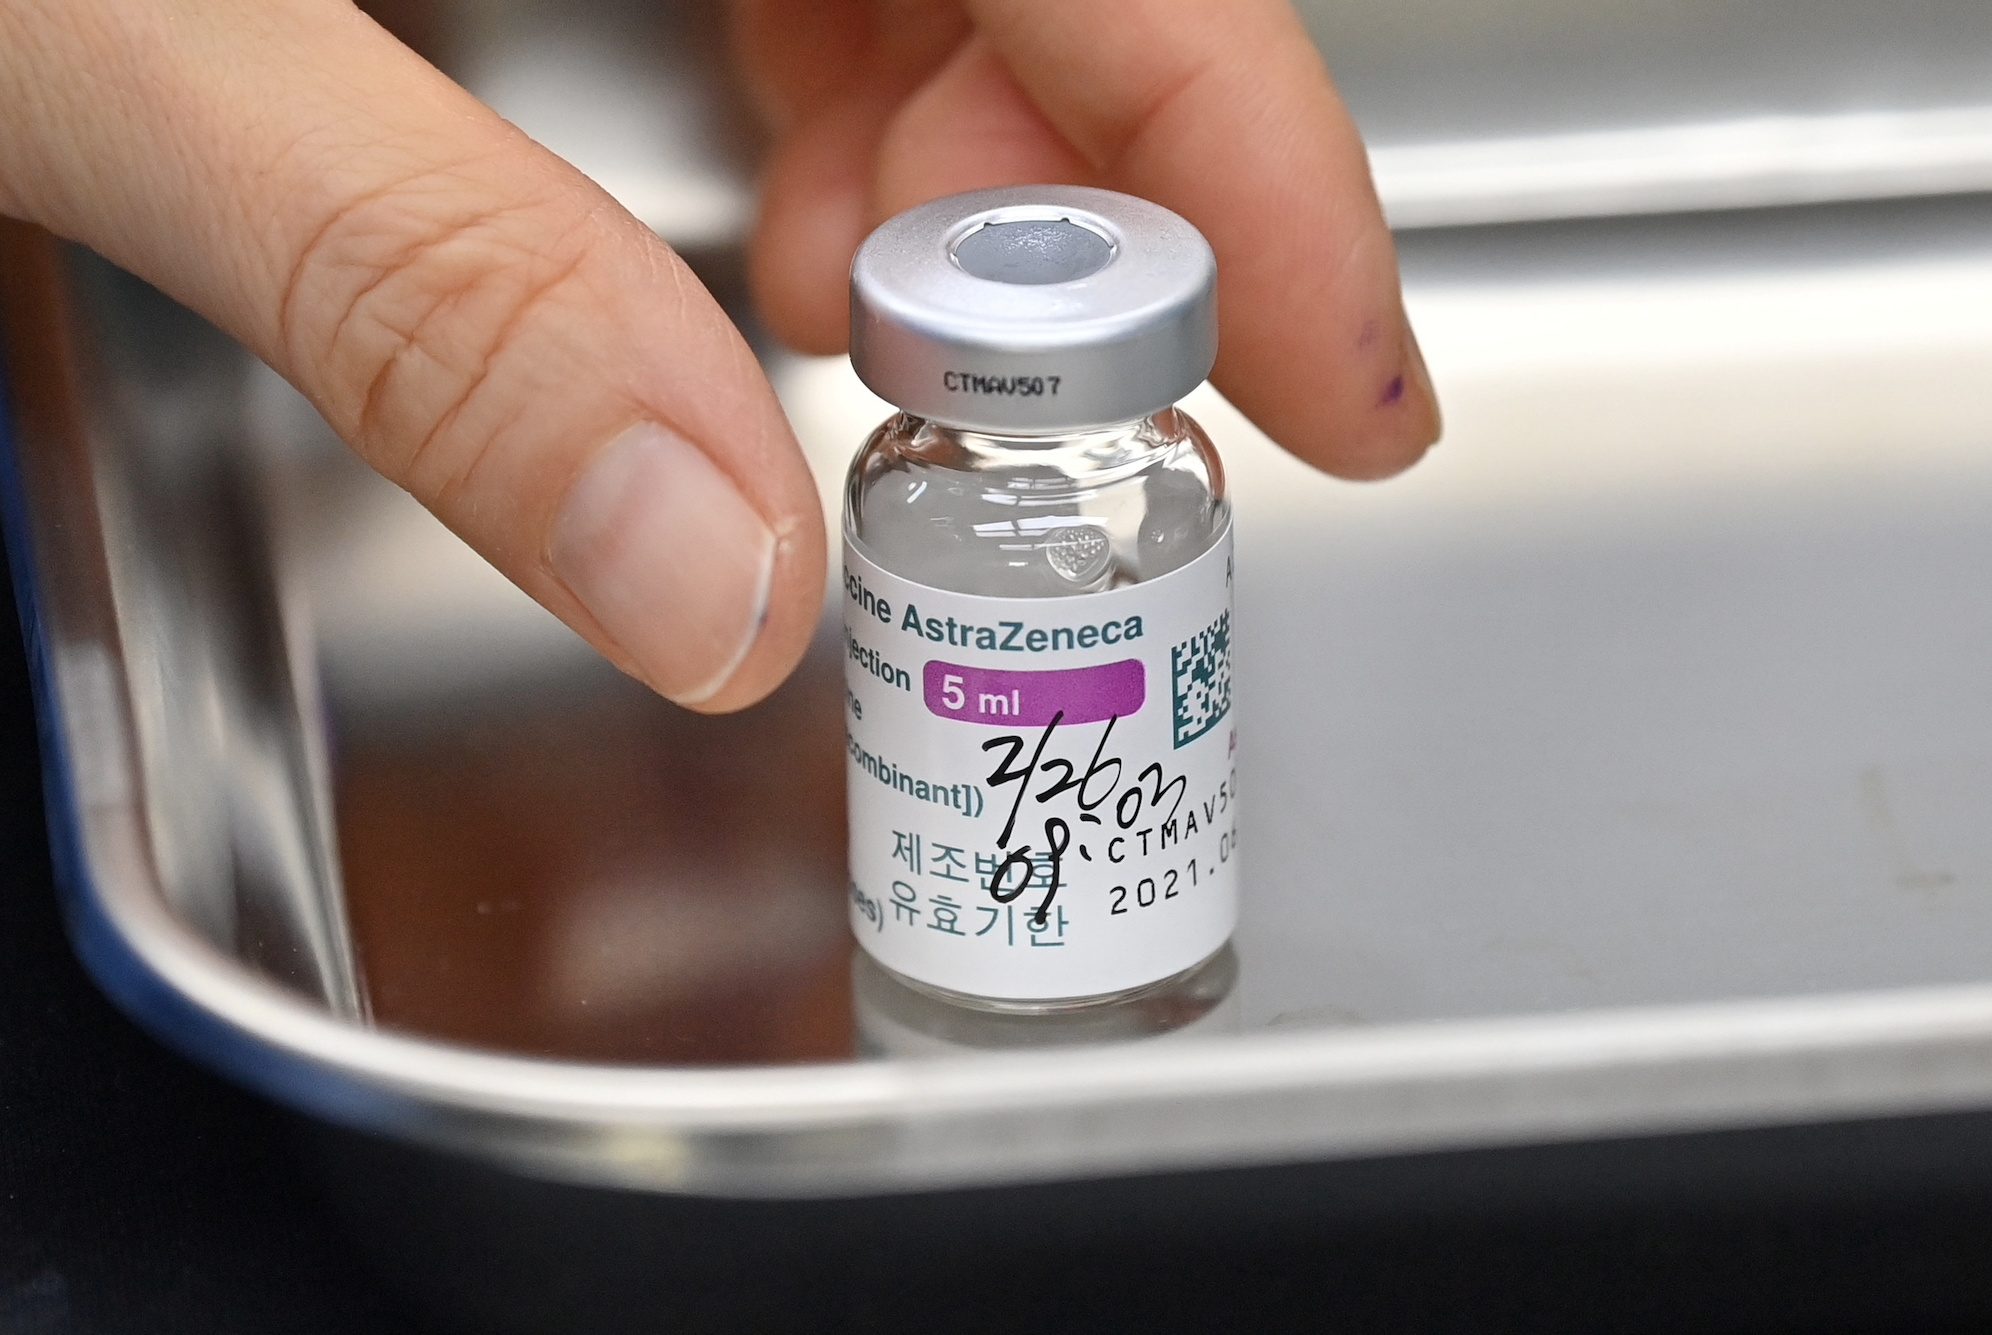 South Korea probes deaths of 2 who received AstraZeneca COVID-19 vaccine